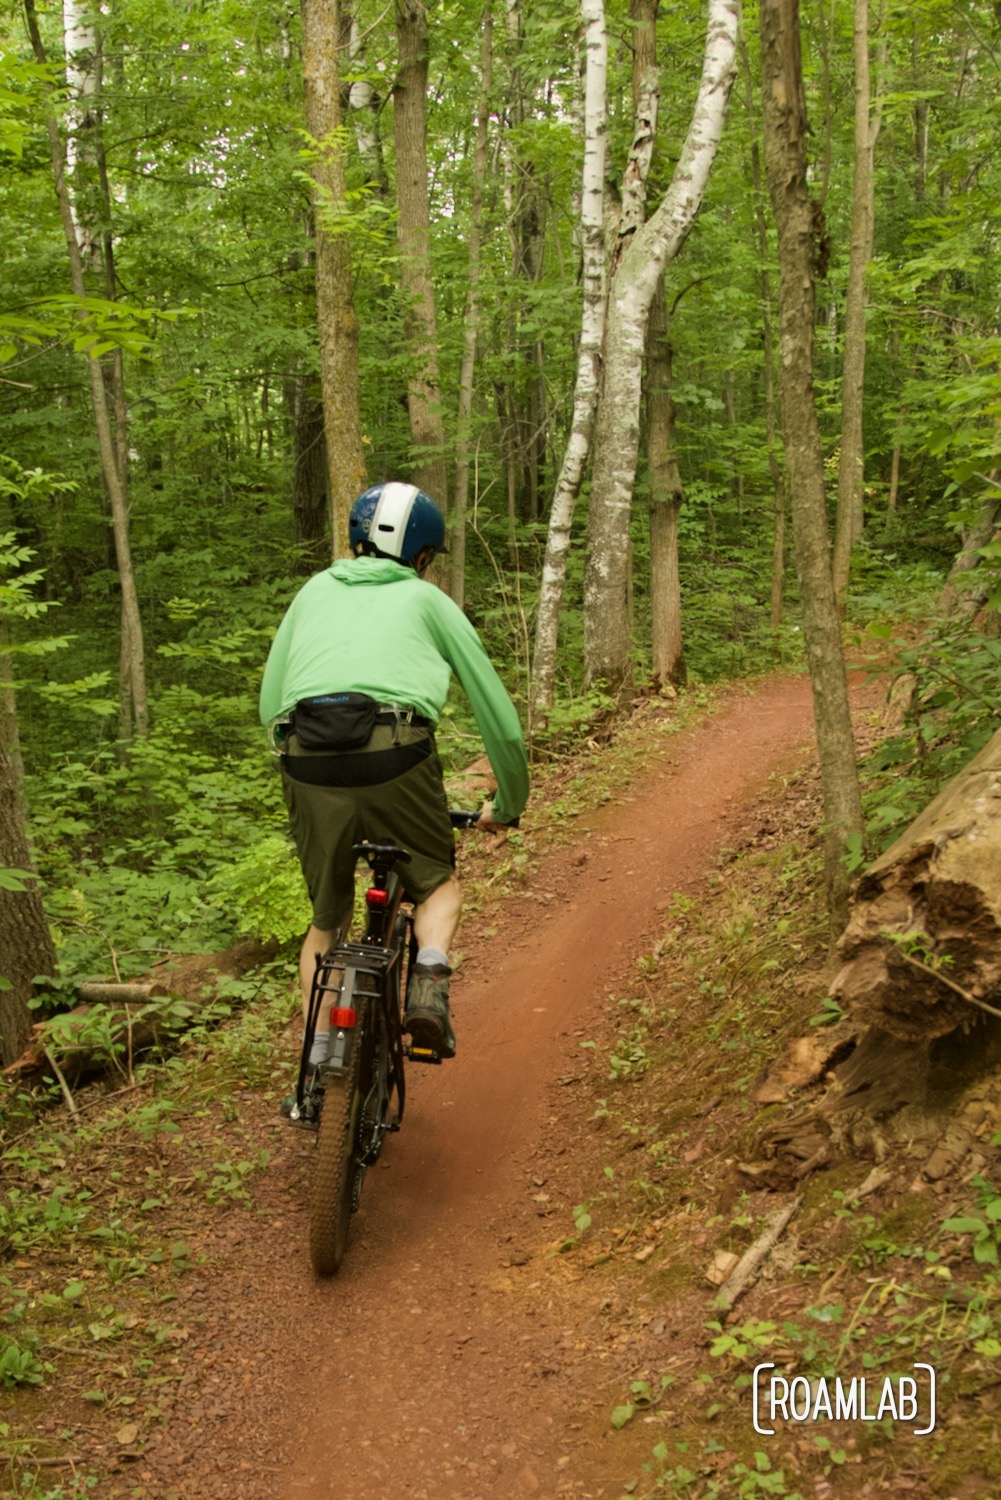 Man on a mountain bike peddling on red dirt single track in a forest.